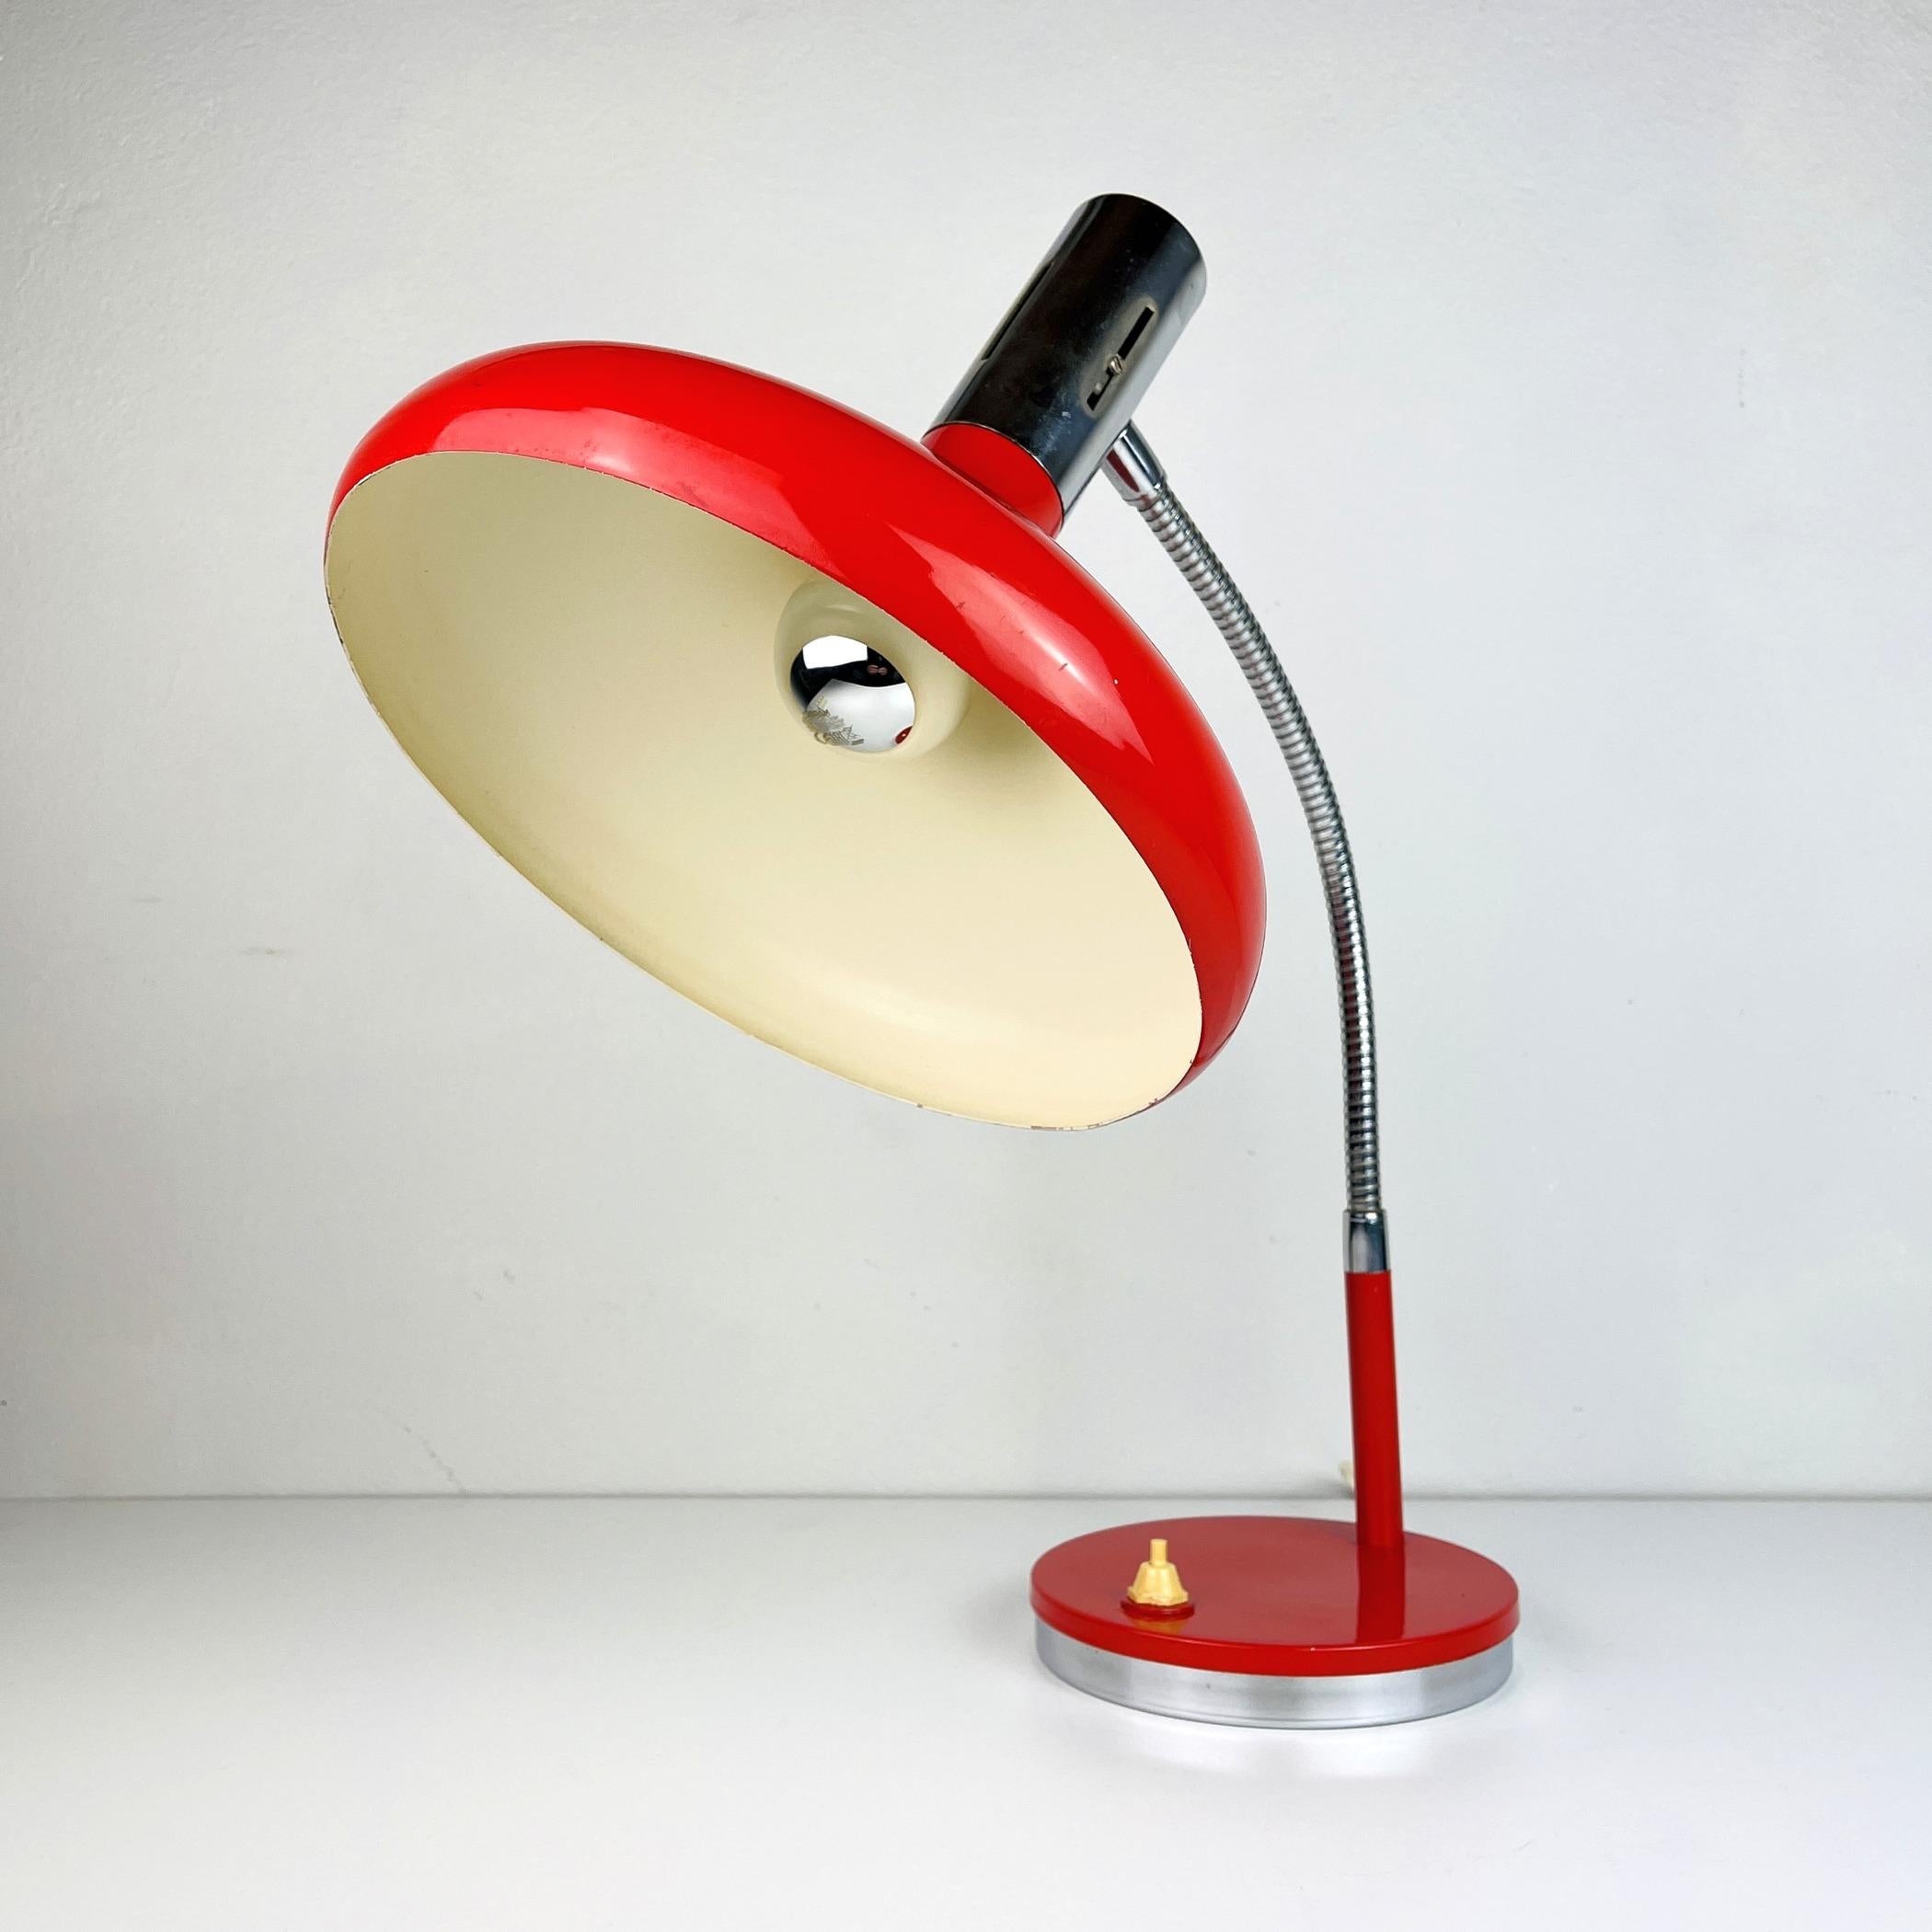 Vintage adjustable gooseneck desk lamp made in Italy in the '70s. The lamp is completely metal, has a heavy, stable bottom. Fully rotatable tilts in height. Requires a standard Edison E27 with a screw lamp. Cord length 105 cm. The lamp is in good